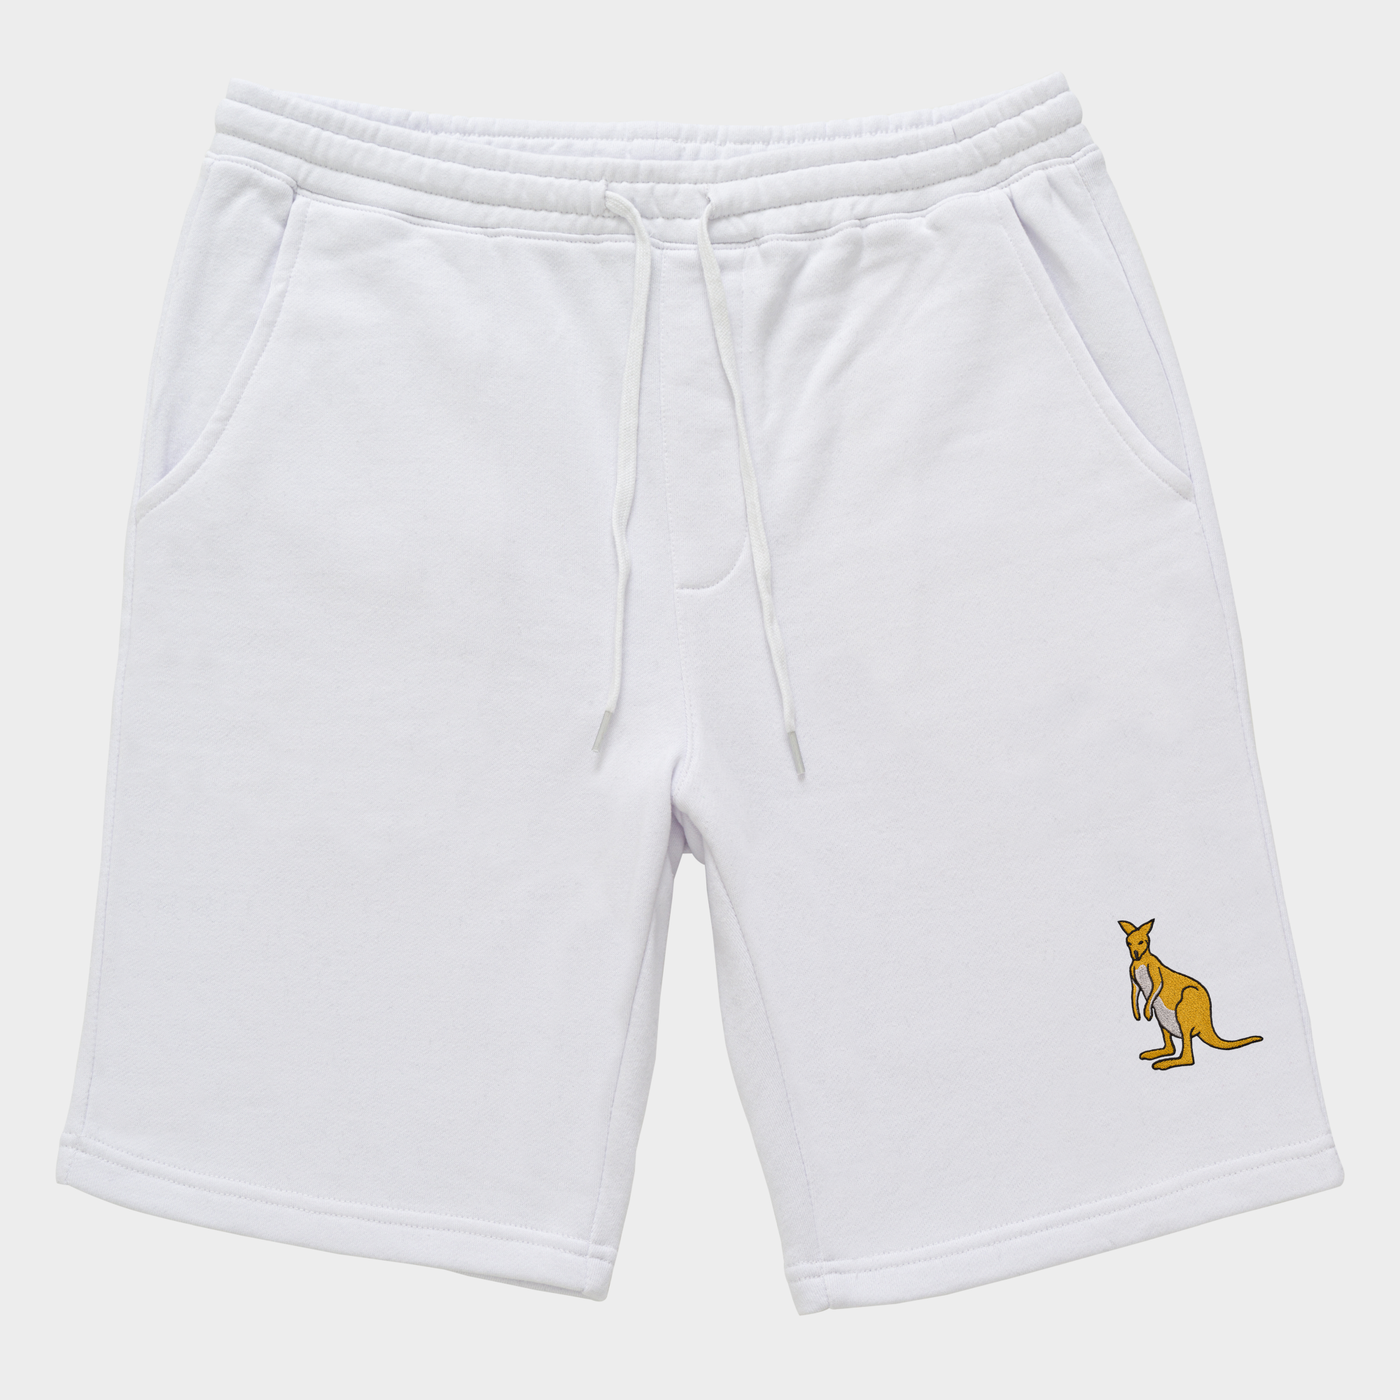 Bobby's Planet Men's Embroidered Kangaroo Shorts from Australia Down Under Animals Collection in White Color#color_white